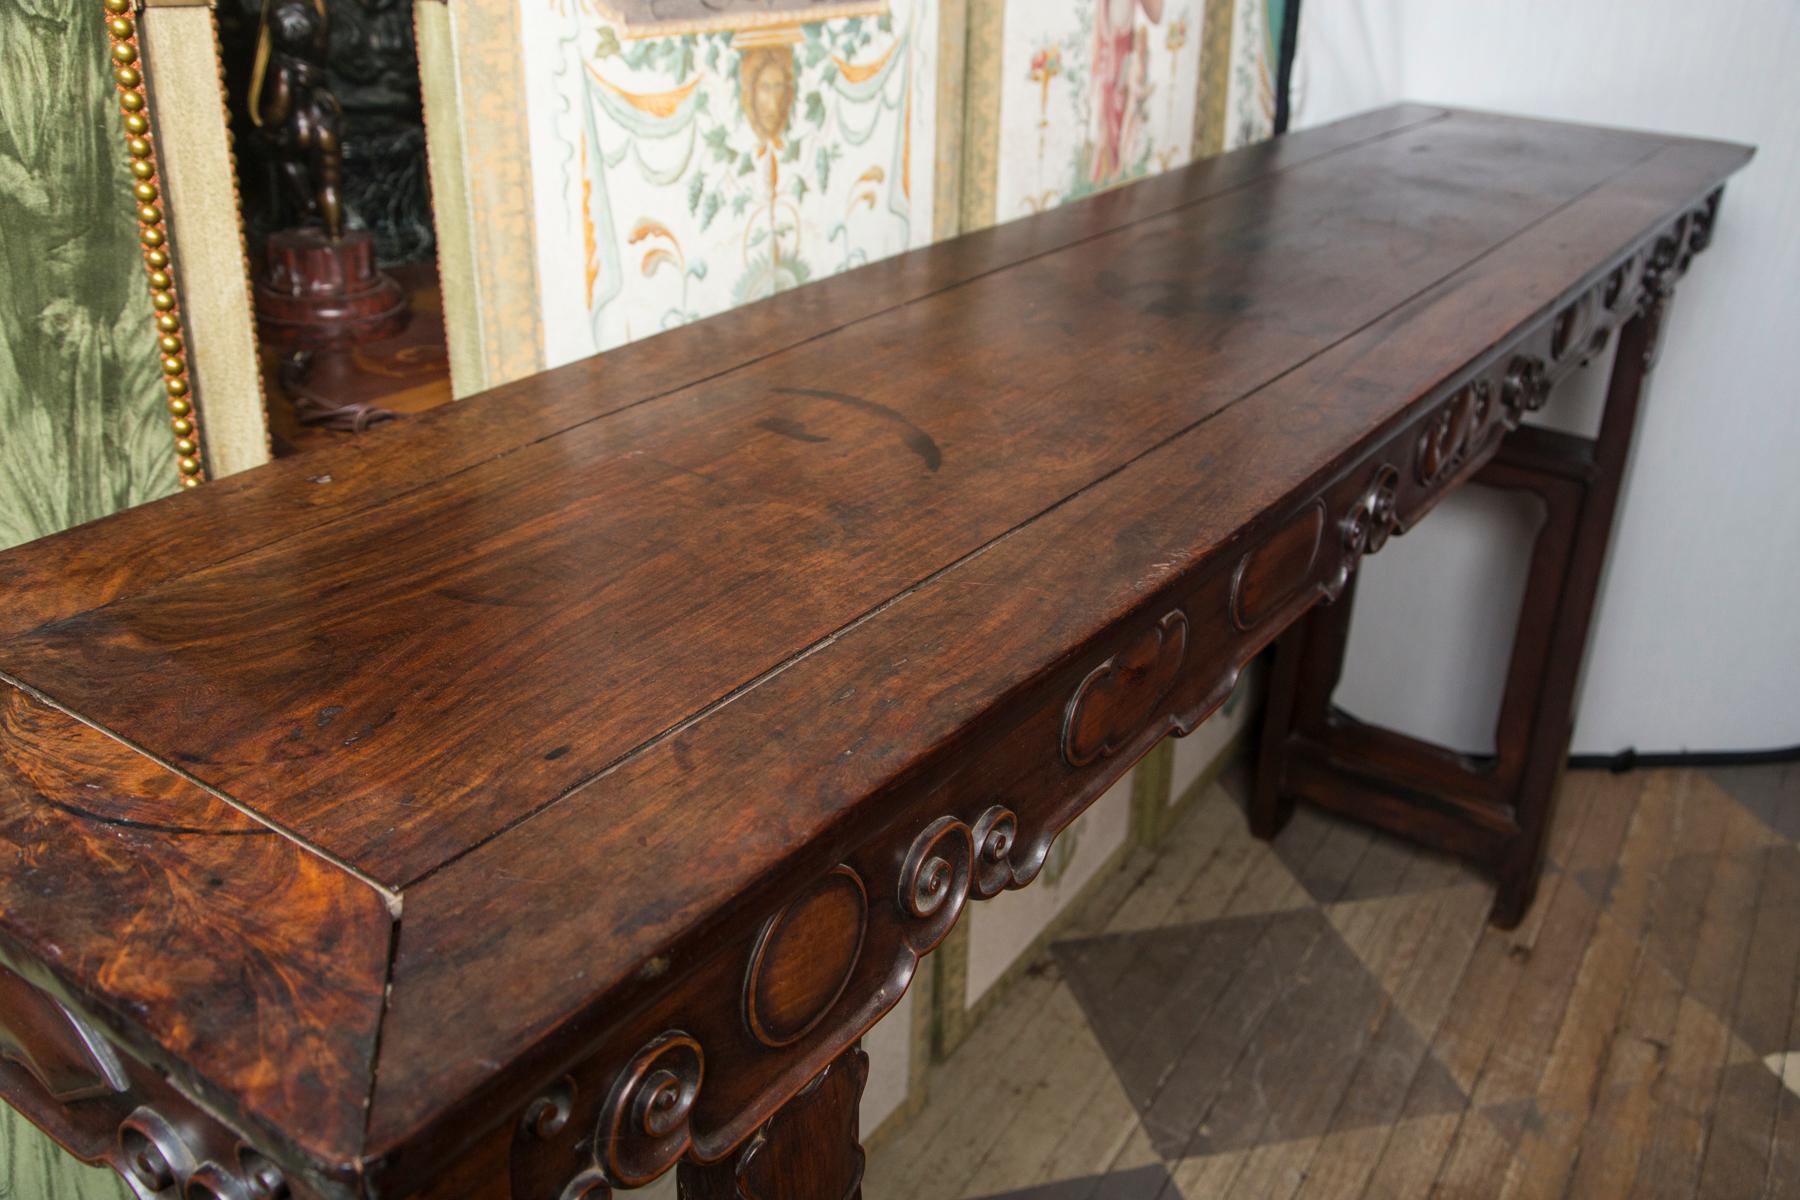 Hand-Carved 17th-18th Century Chinese Hard Wood Altar Table